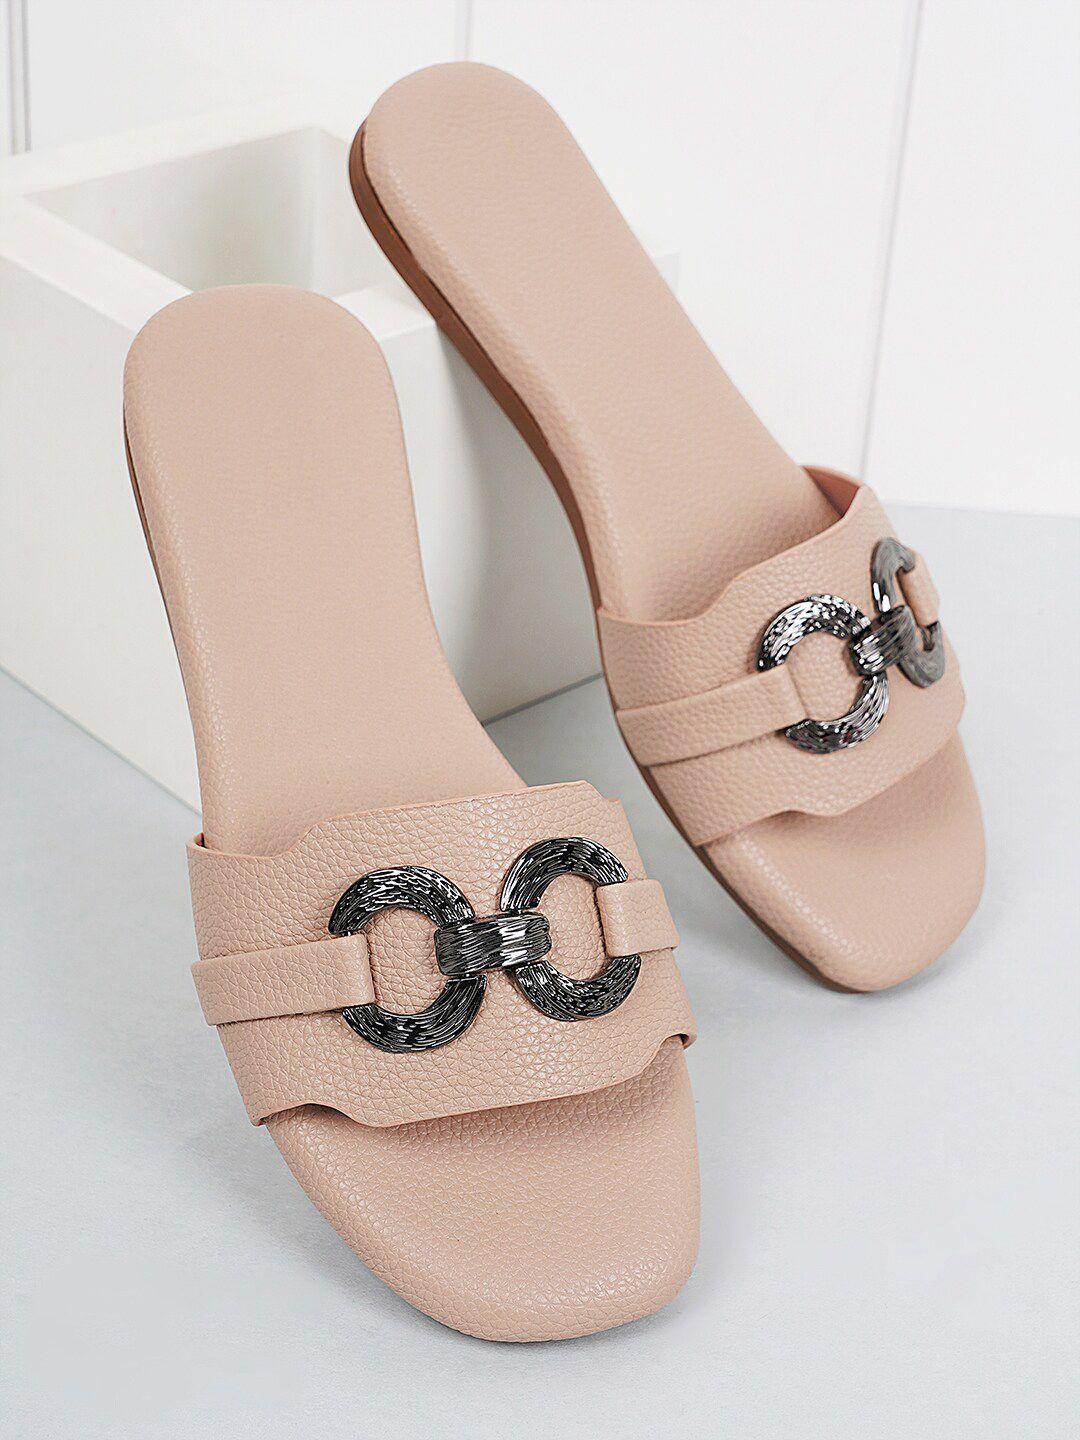 style shoes textured embellished open toe flats